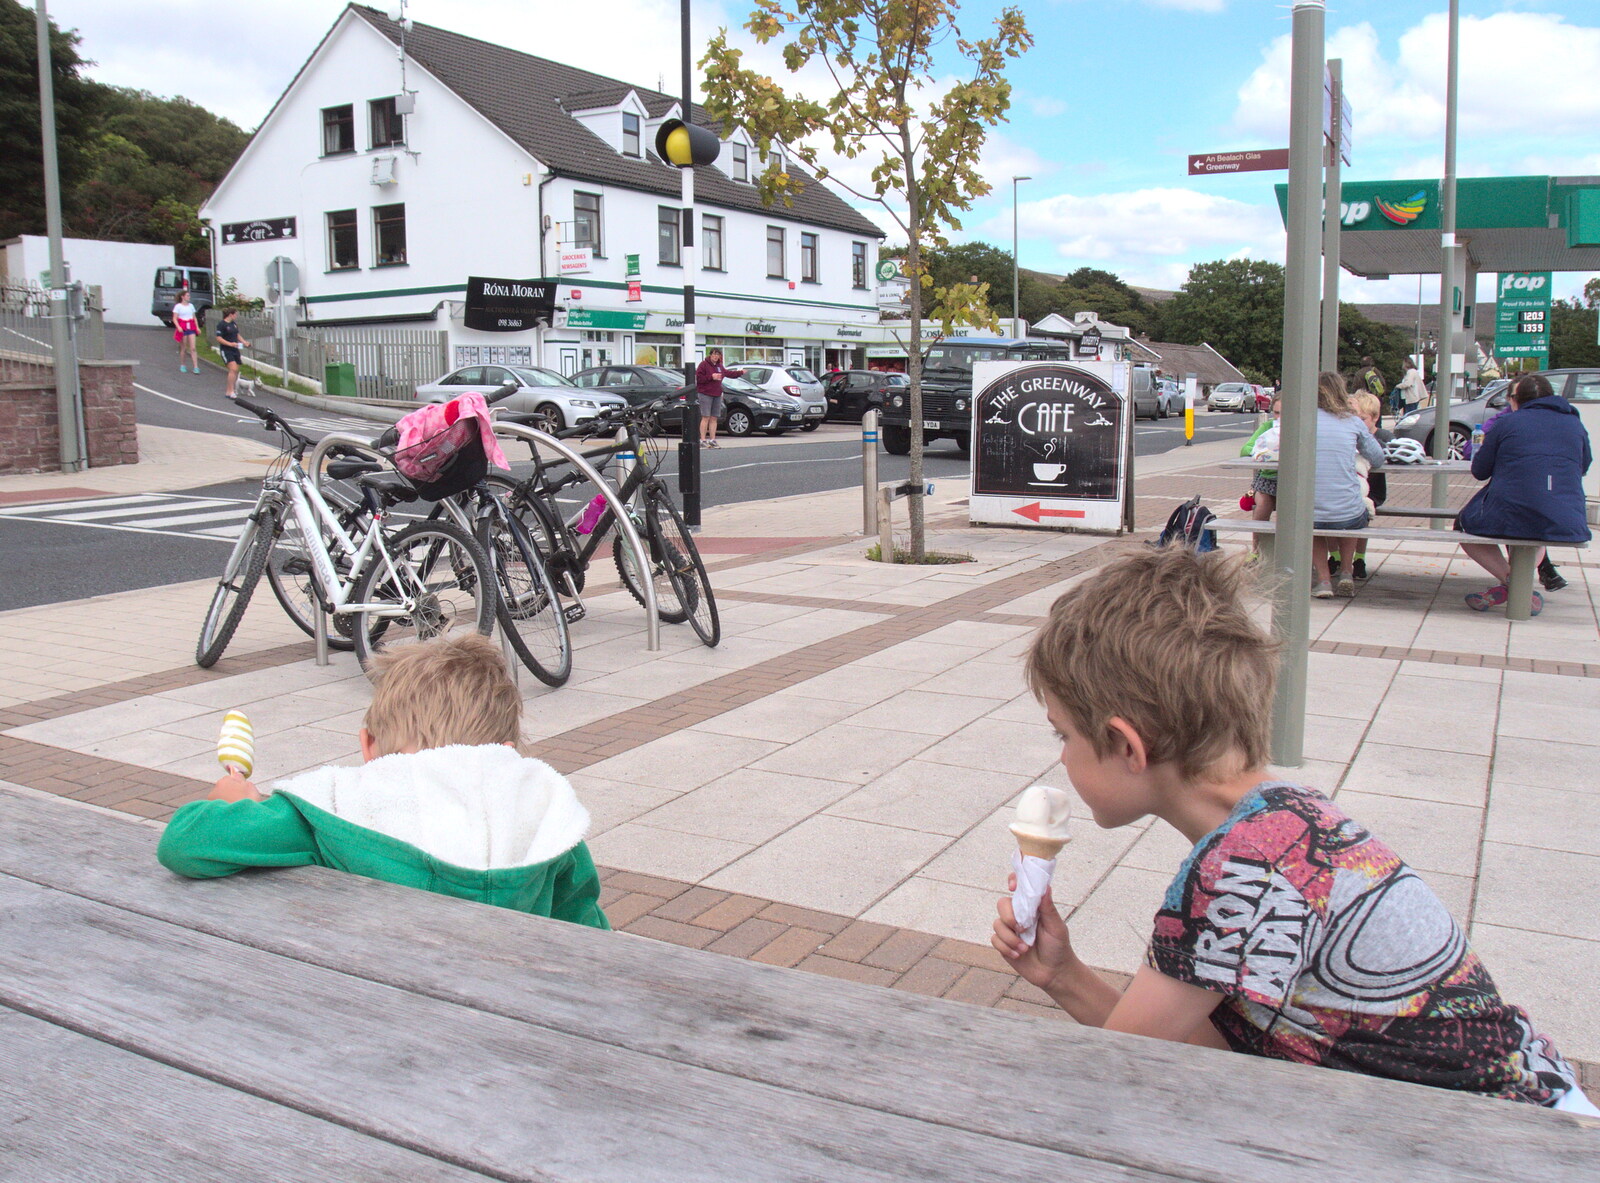 The boys eat ice cream in Mulranny from A Bike Ride to Mulranny, County Mayo, Ireland - 9th August 2017